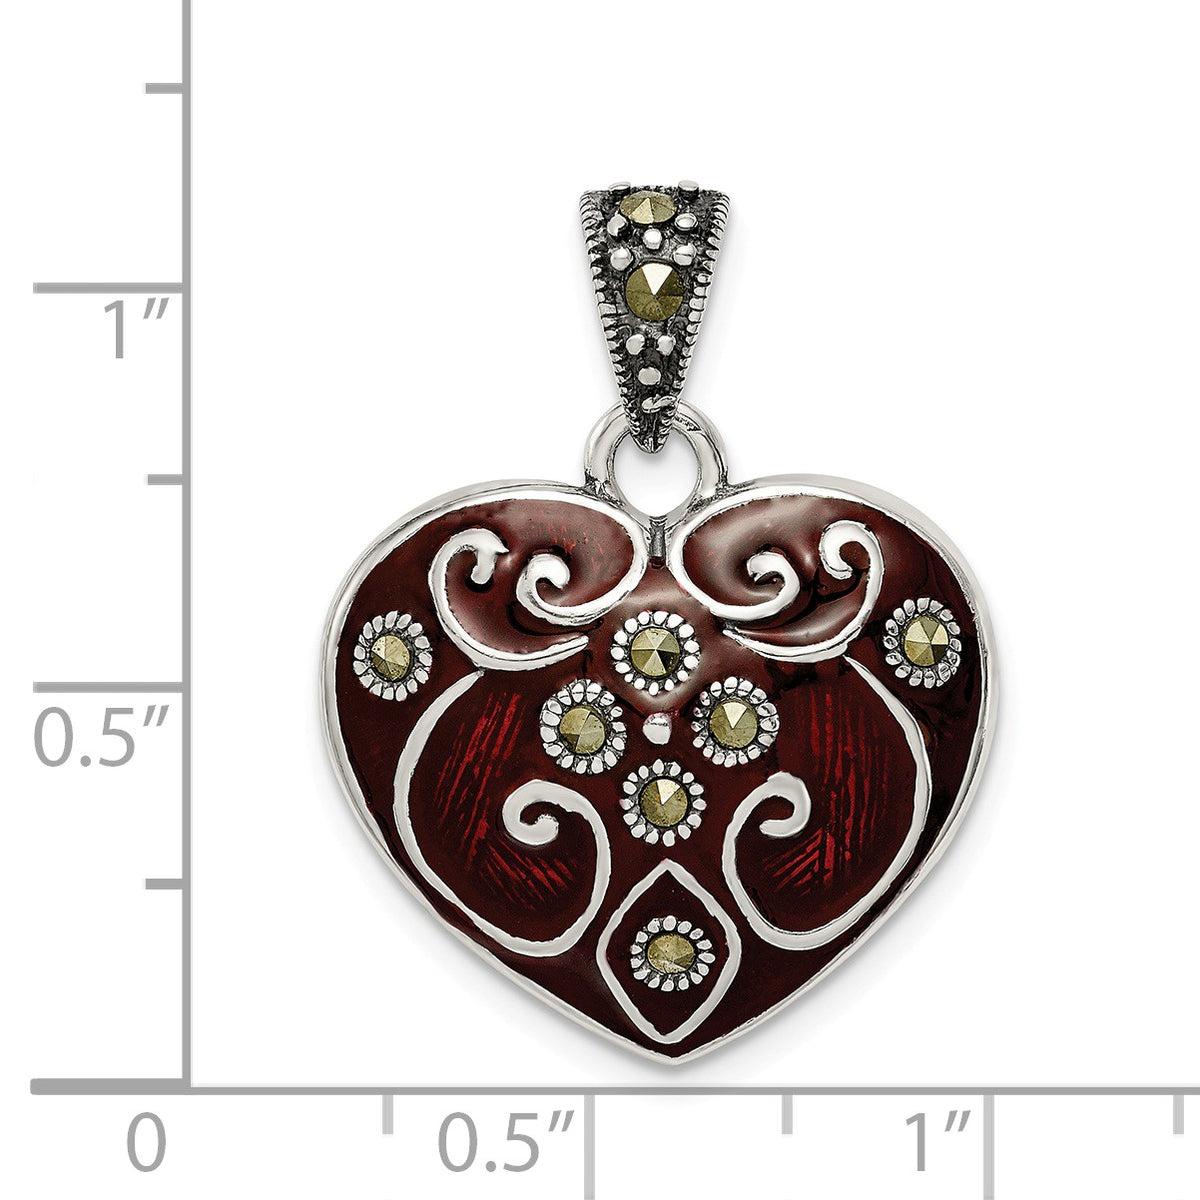 Alternate view of the Sterling Silver, Red Enamel and Marcasite Heart Pendant, 21mm by The Black Bow Jewelry Co.